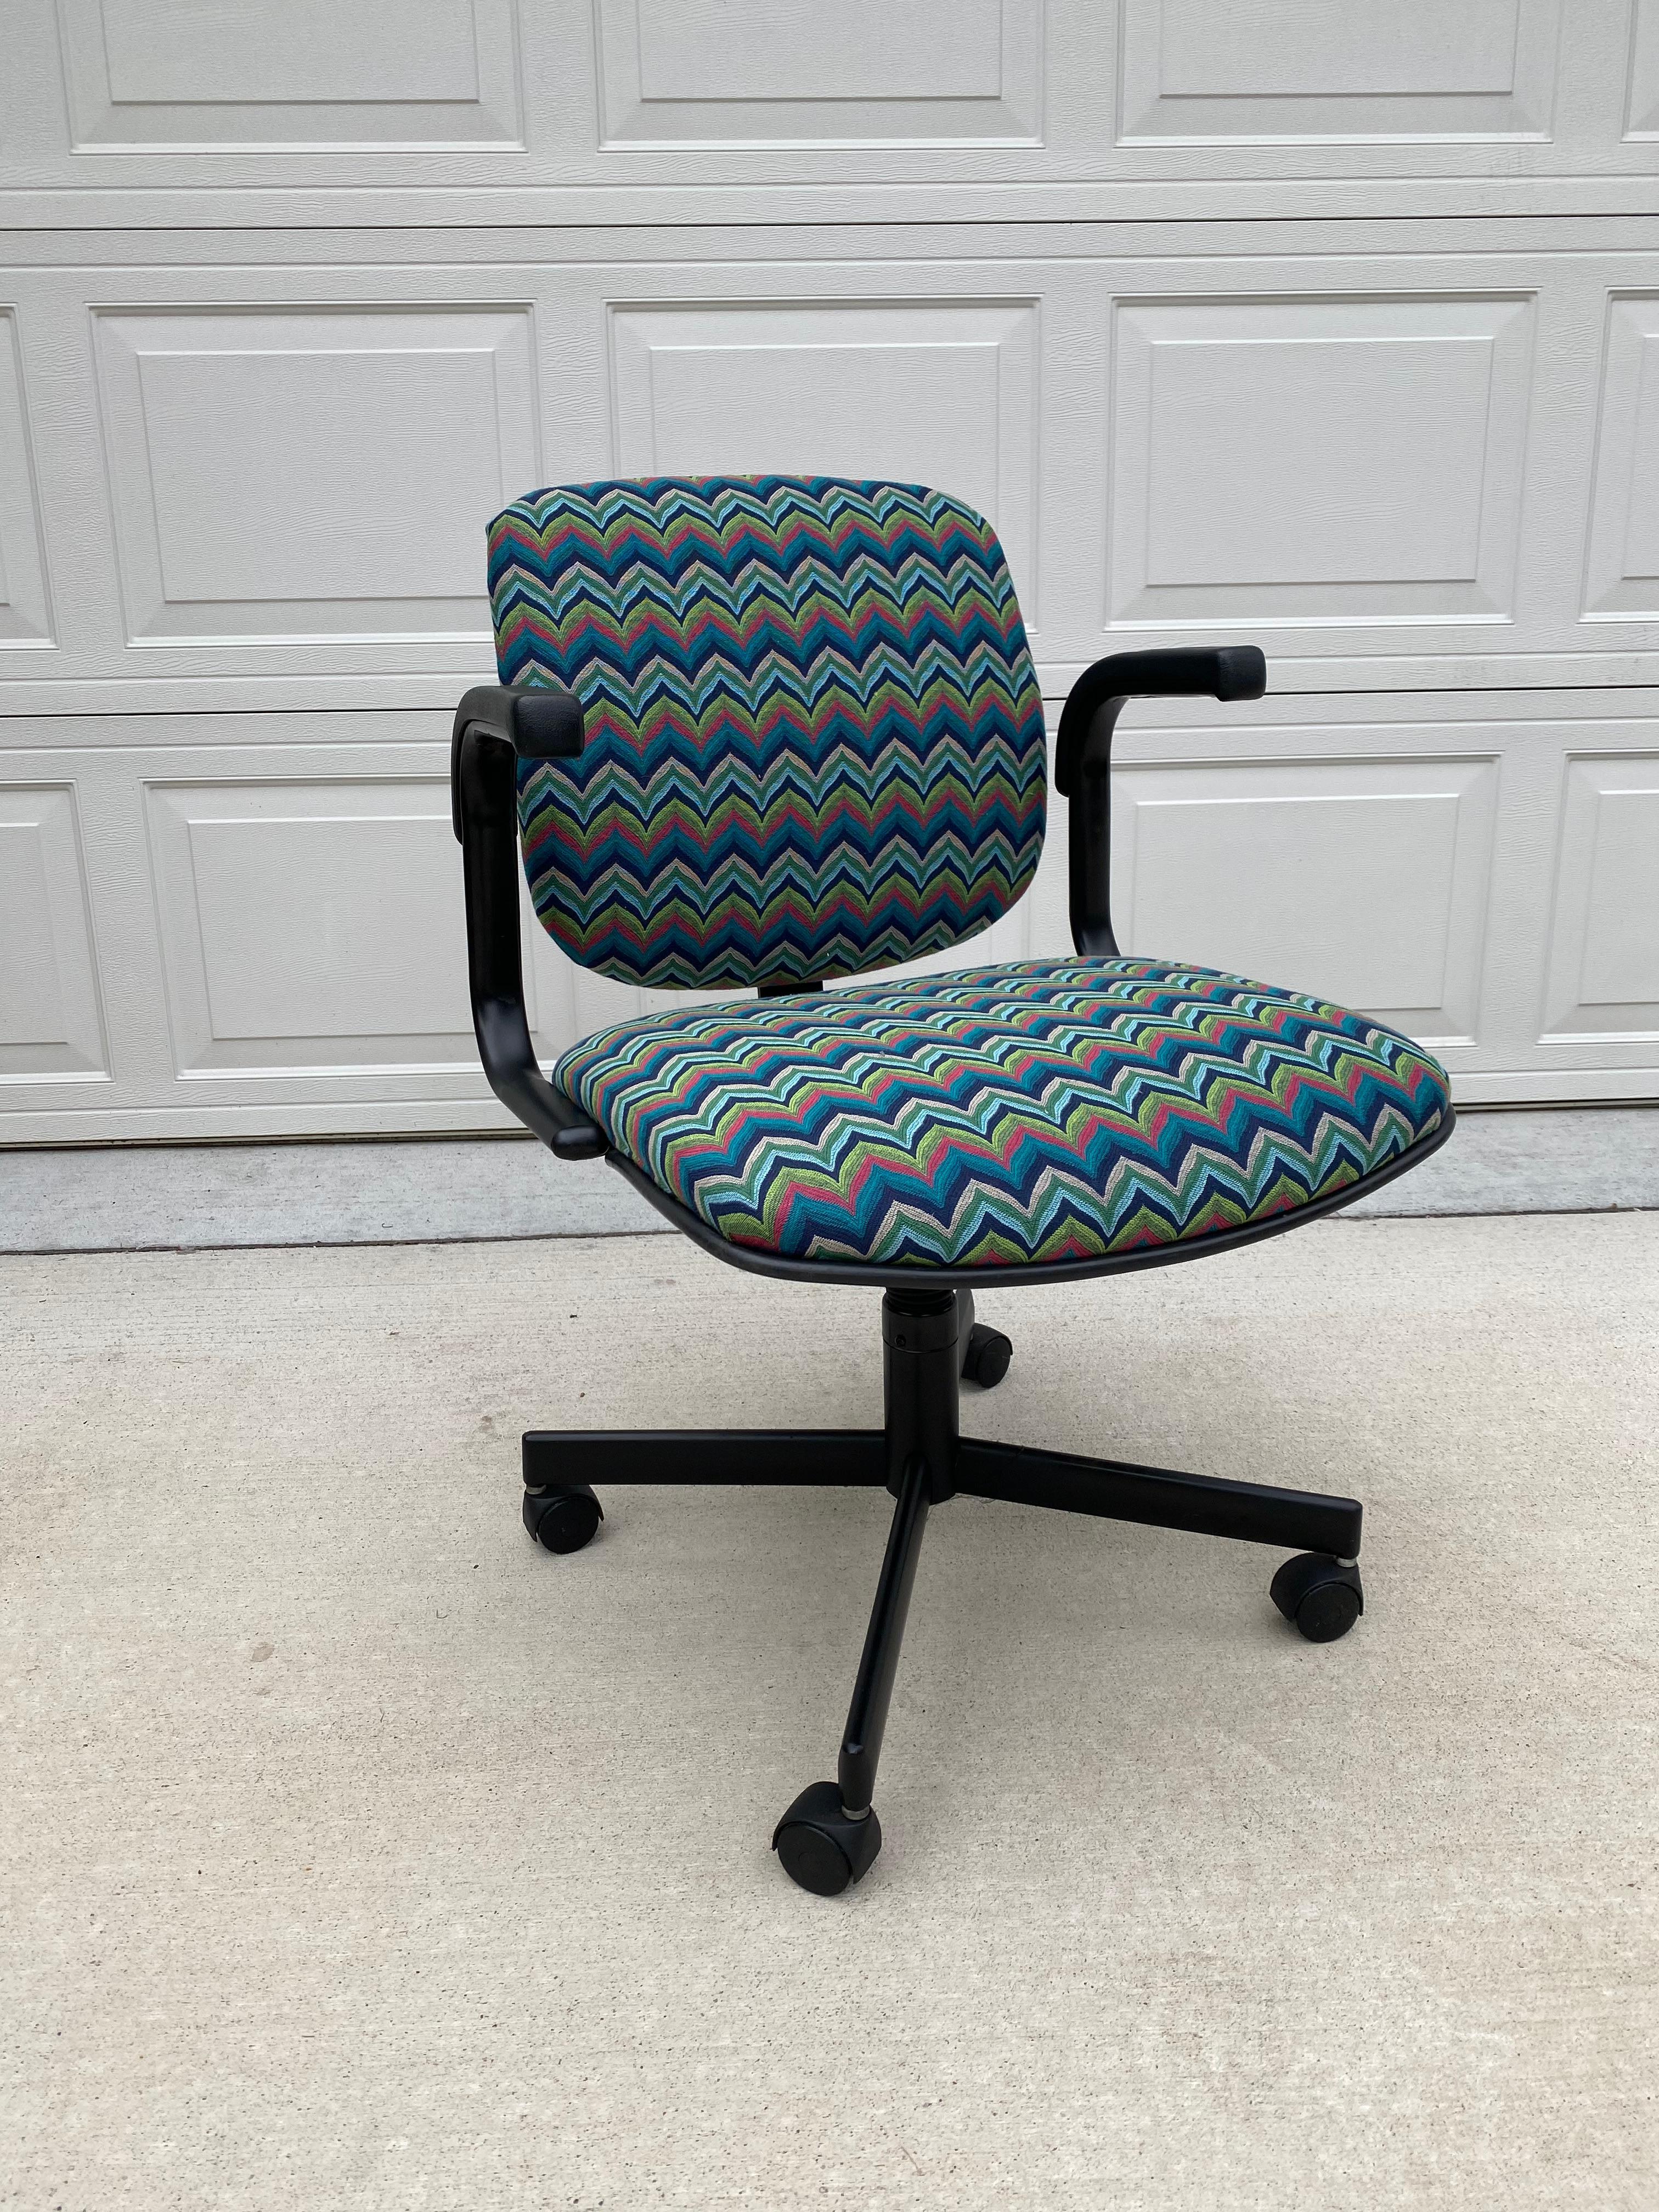 Reupholstered office chair by Stylex, Inc. in a mid-century modern flame stitch woven fabric. This office chair is in amazing condition considering its age. Its a perfect chair to add to your office!.